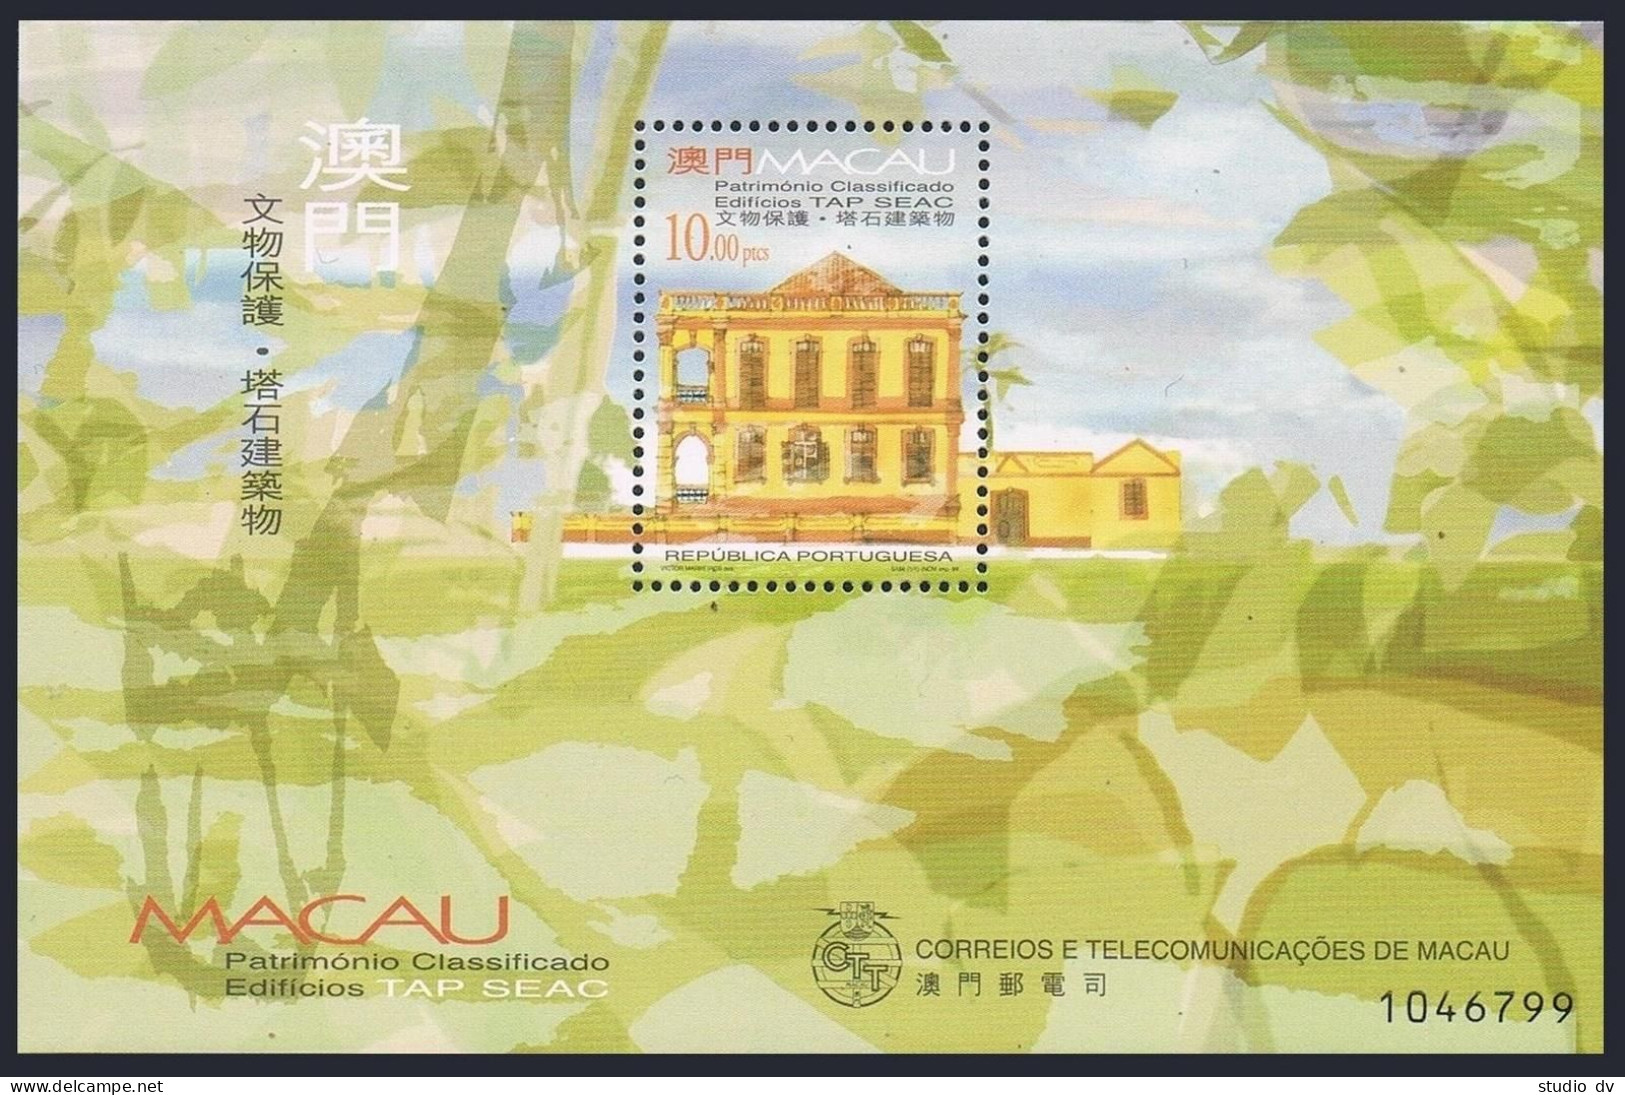 Macao 999 Sheet,1000,MNH. TAP SEAC Buildings,1999. - Unused Stamps